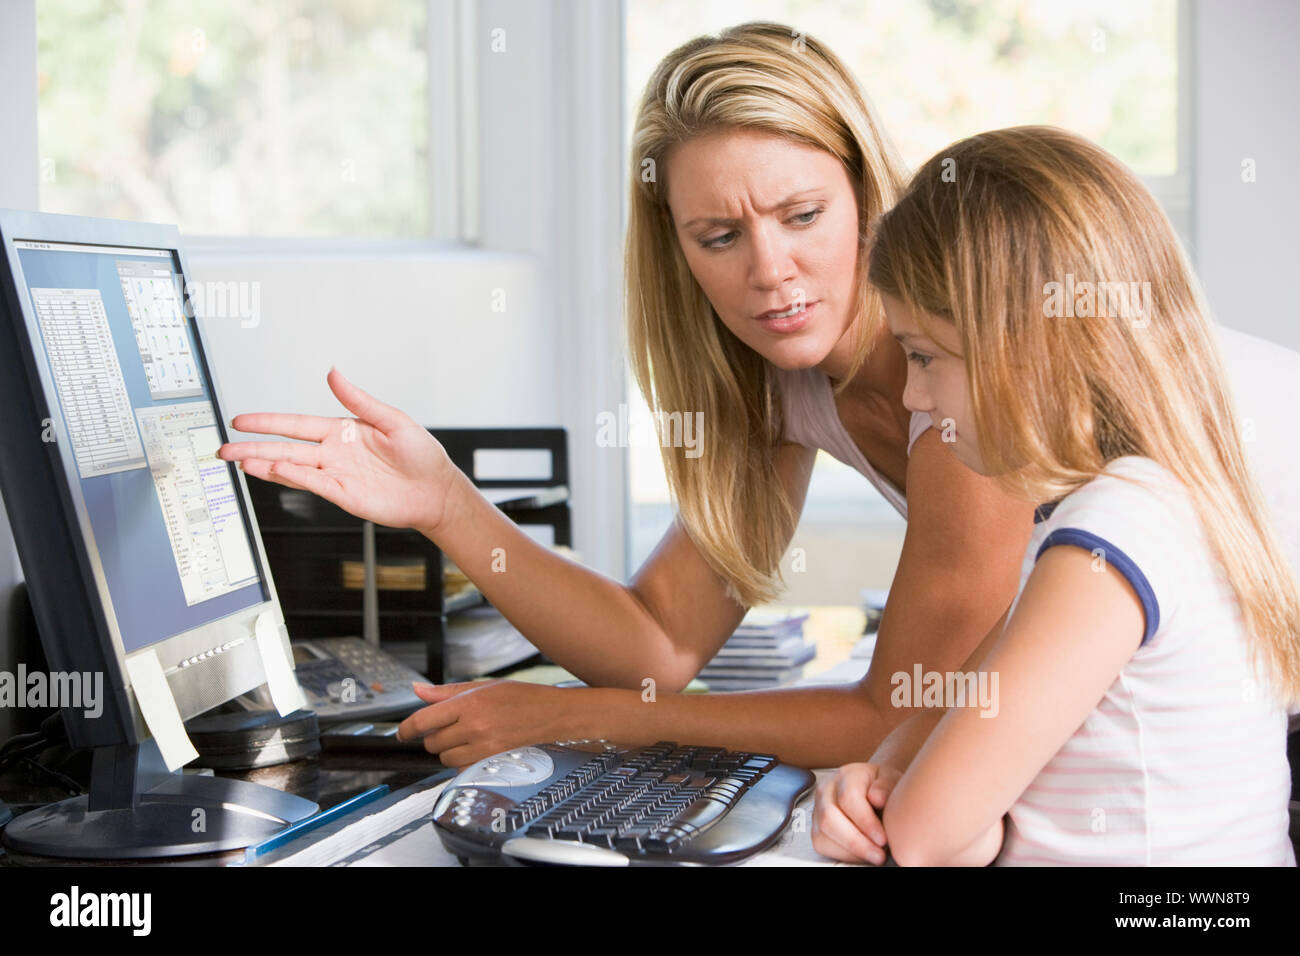 Woman and young girl in home office with computer looking unhapp Stock Photo